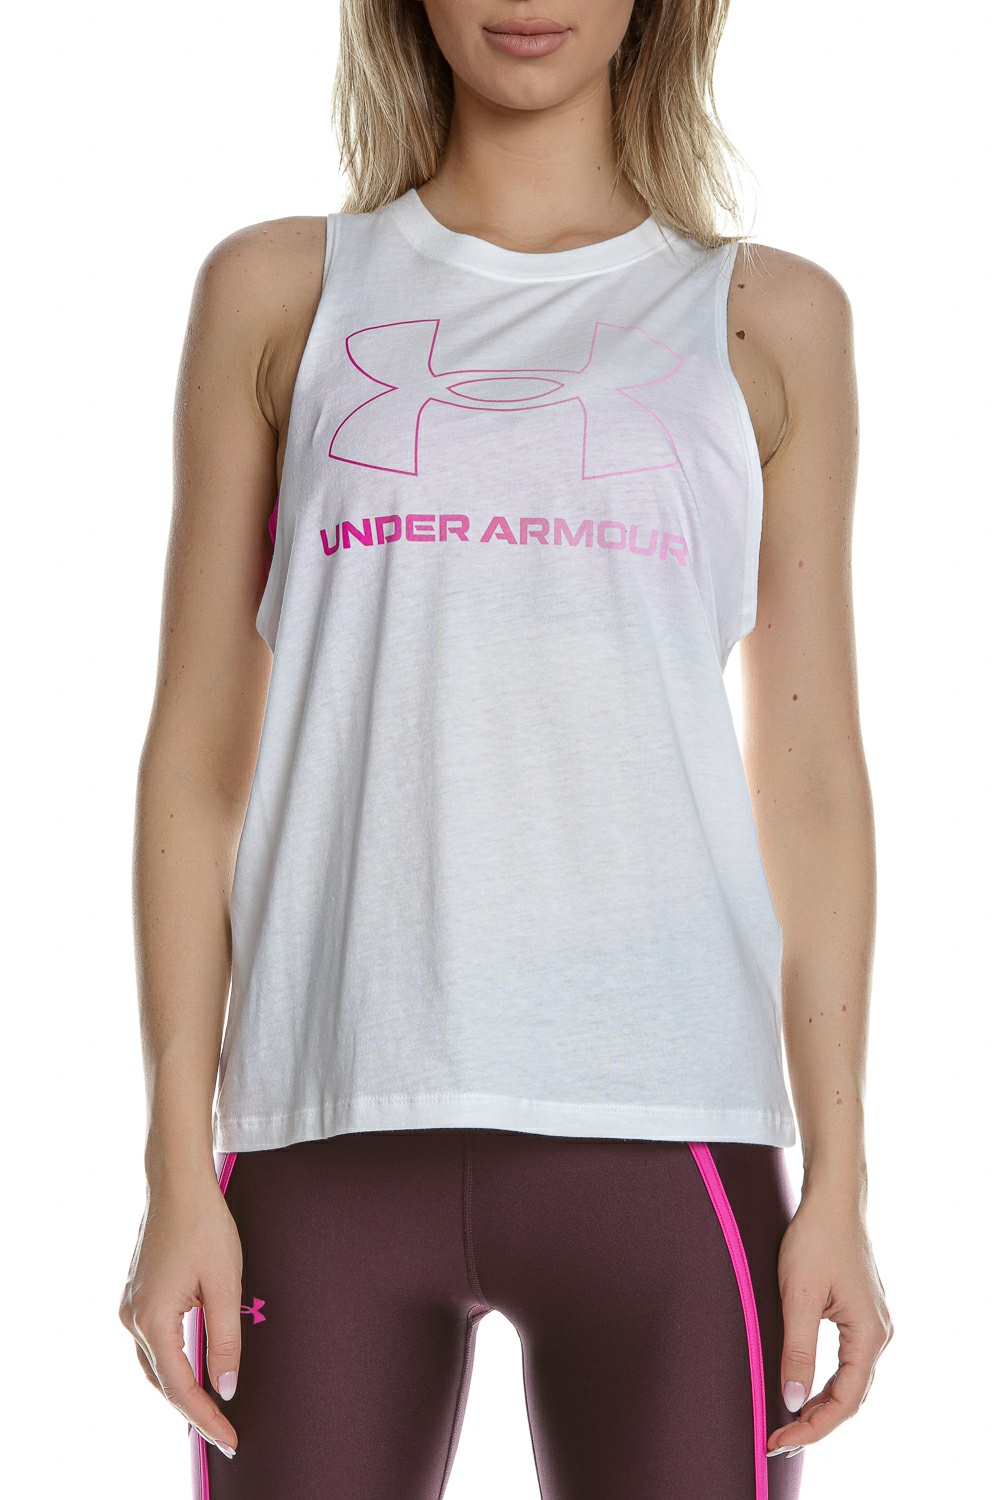 UNDER ARMOUR – Γυναικειο top UNDER ARMOUR Live Sportstyle Graphic Tank λευκη